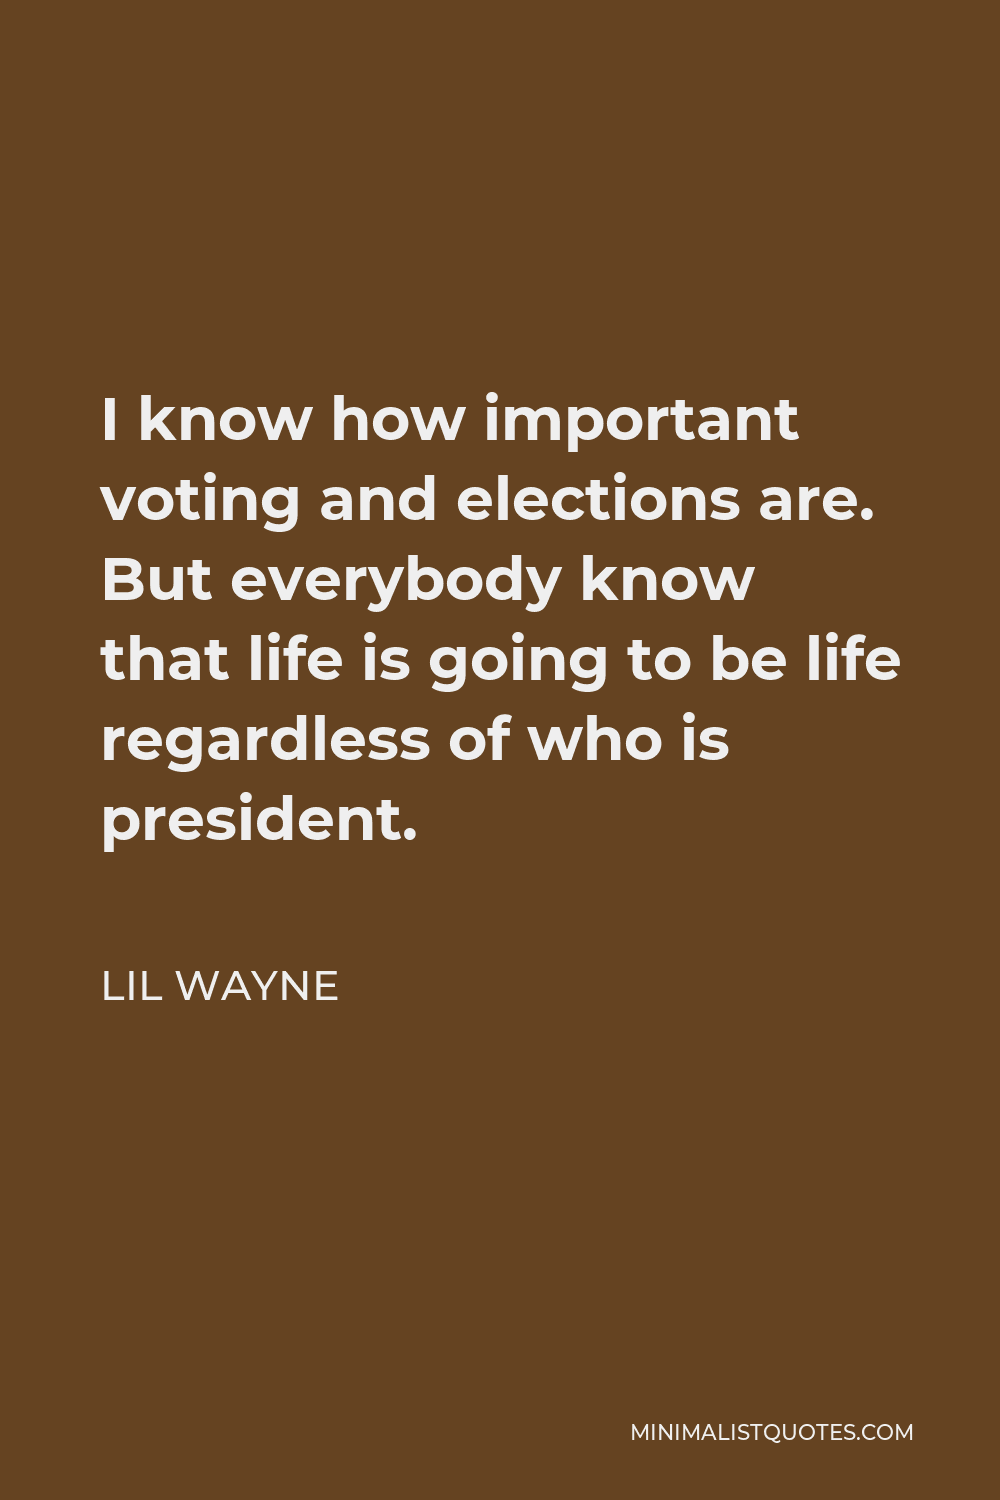 Lil Wayne Quote - I know how important voting and elections are. But everybody know that life is going to be life regardless of who is president.